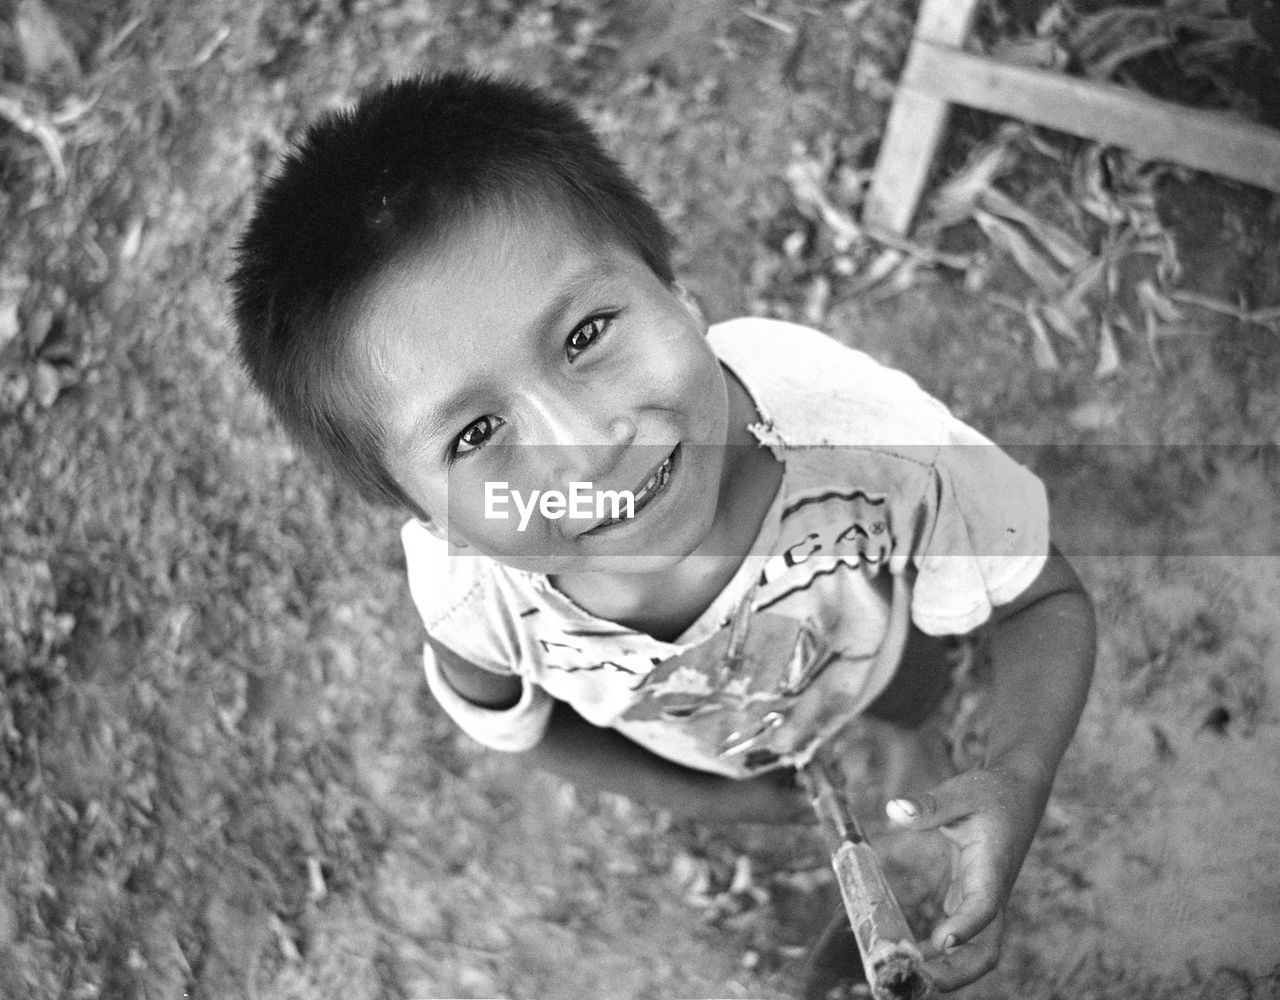 HIGH ANGLE VIEW PORTRAIT OF BOY PLAYING OUTDOORS